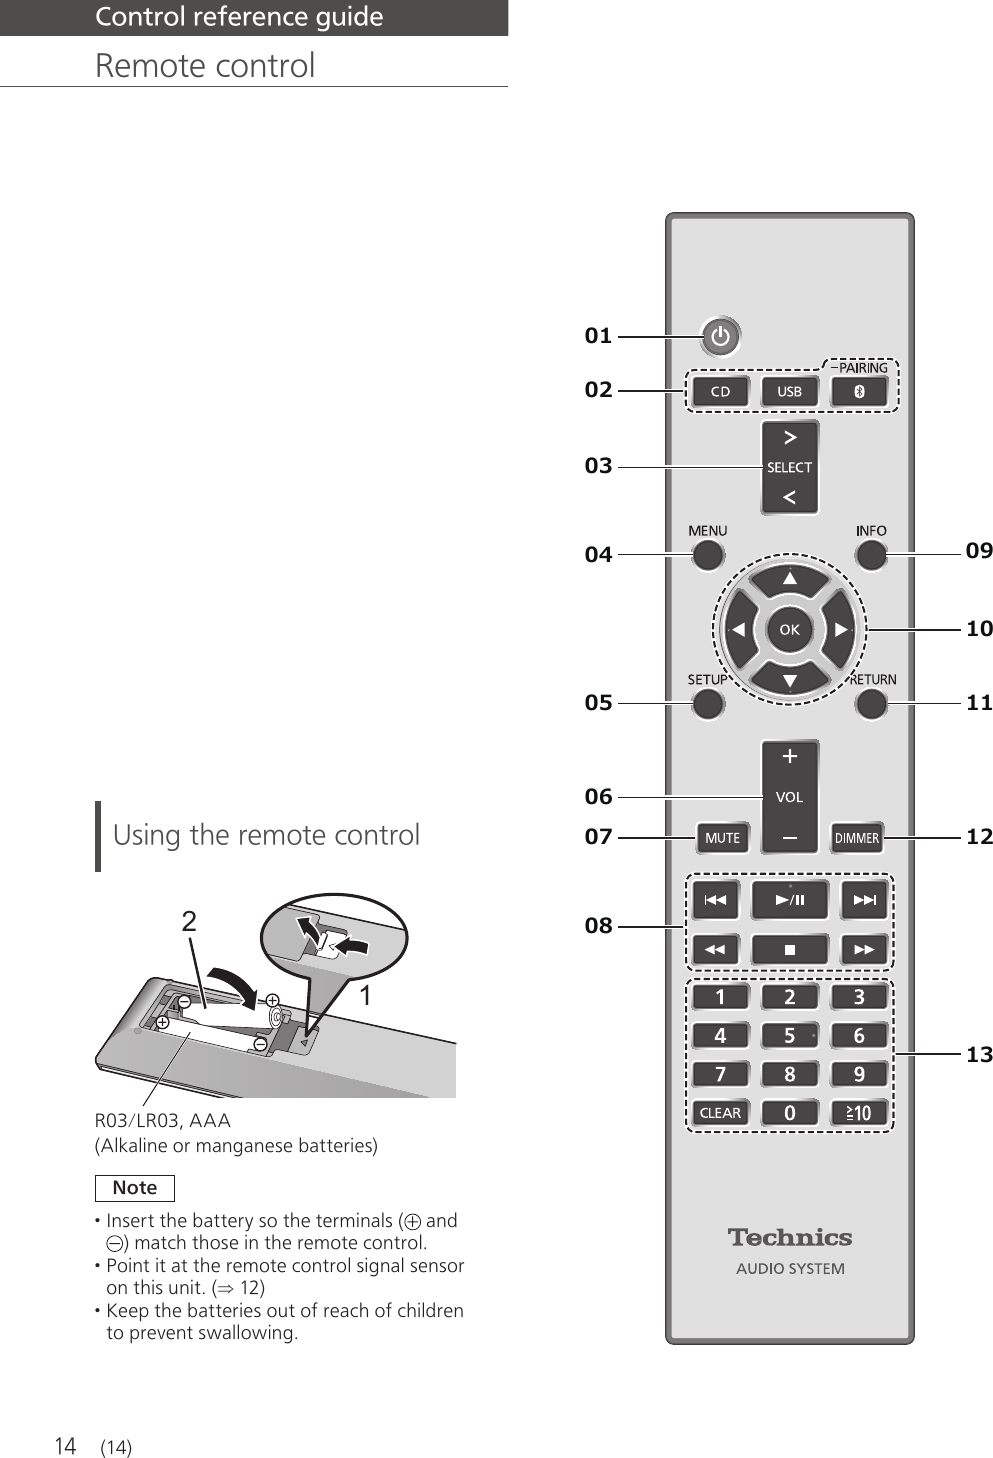 14  Control reference guide   Remote control  Using the remote control 21 R03/LR03, AAA (Alkaline or manganese batteries) Note • Insert the battery so the terminals (  and ) match those in the remote control. • Point it at the remote control signal sensor on this unit. ( 12) • Keep the batteries out of reach of children to prevent swallowing. (14)